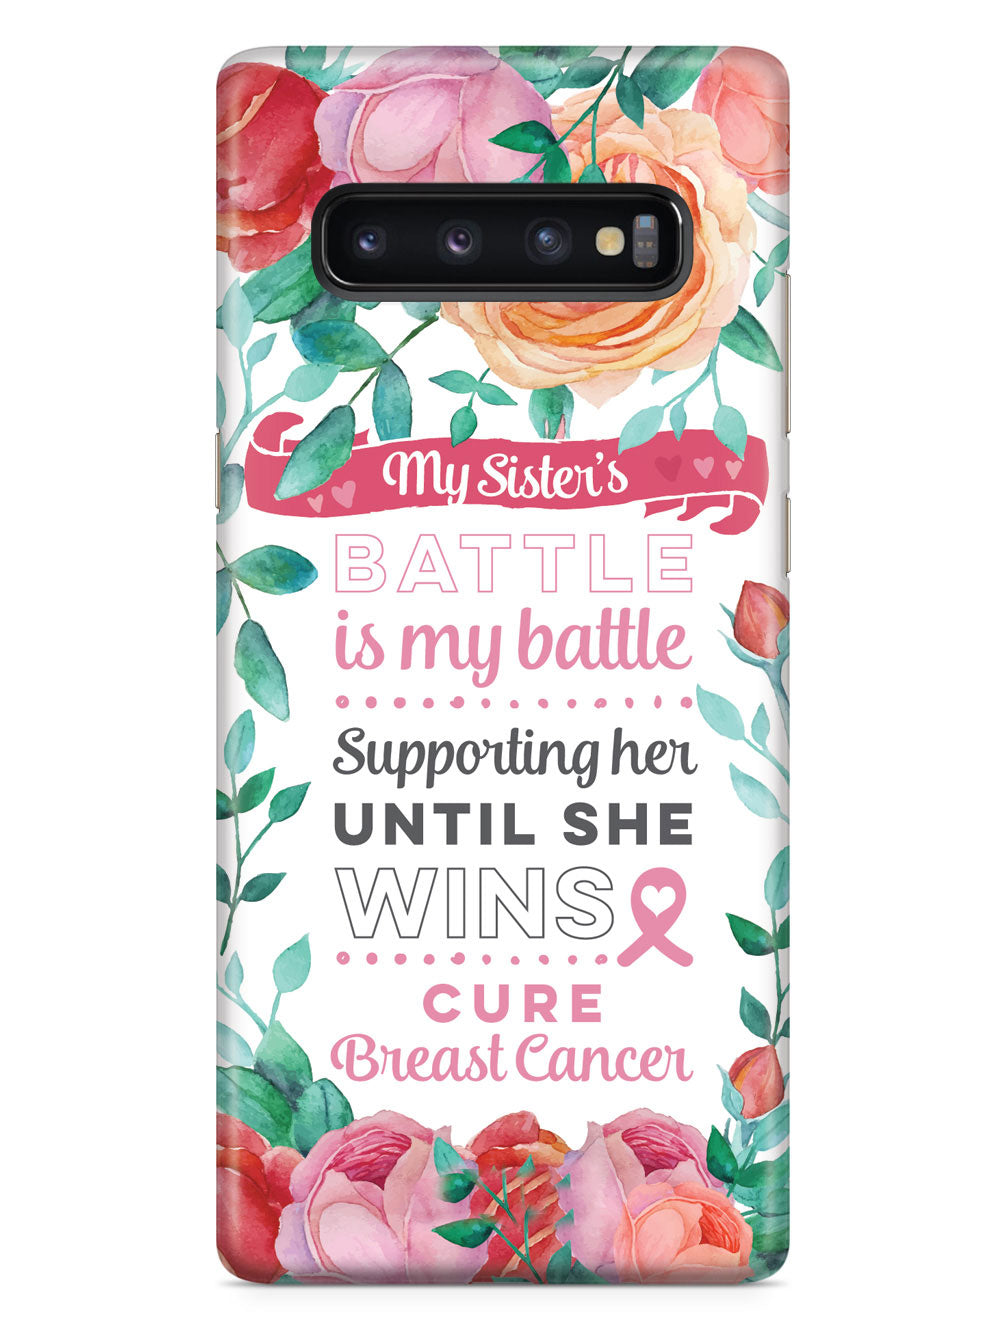 My Sister's Battle - Breast Cancer Awareness Case